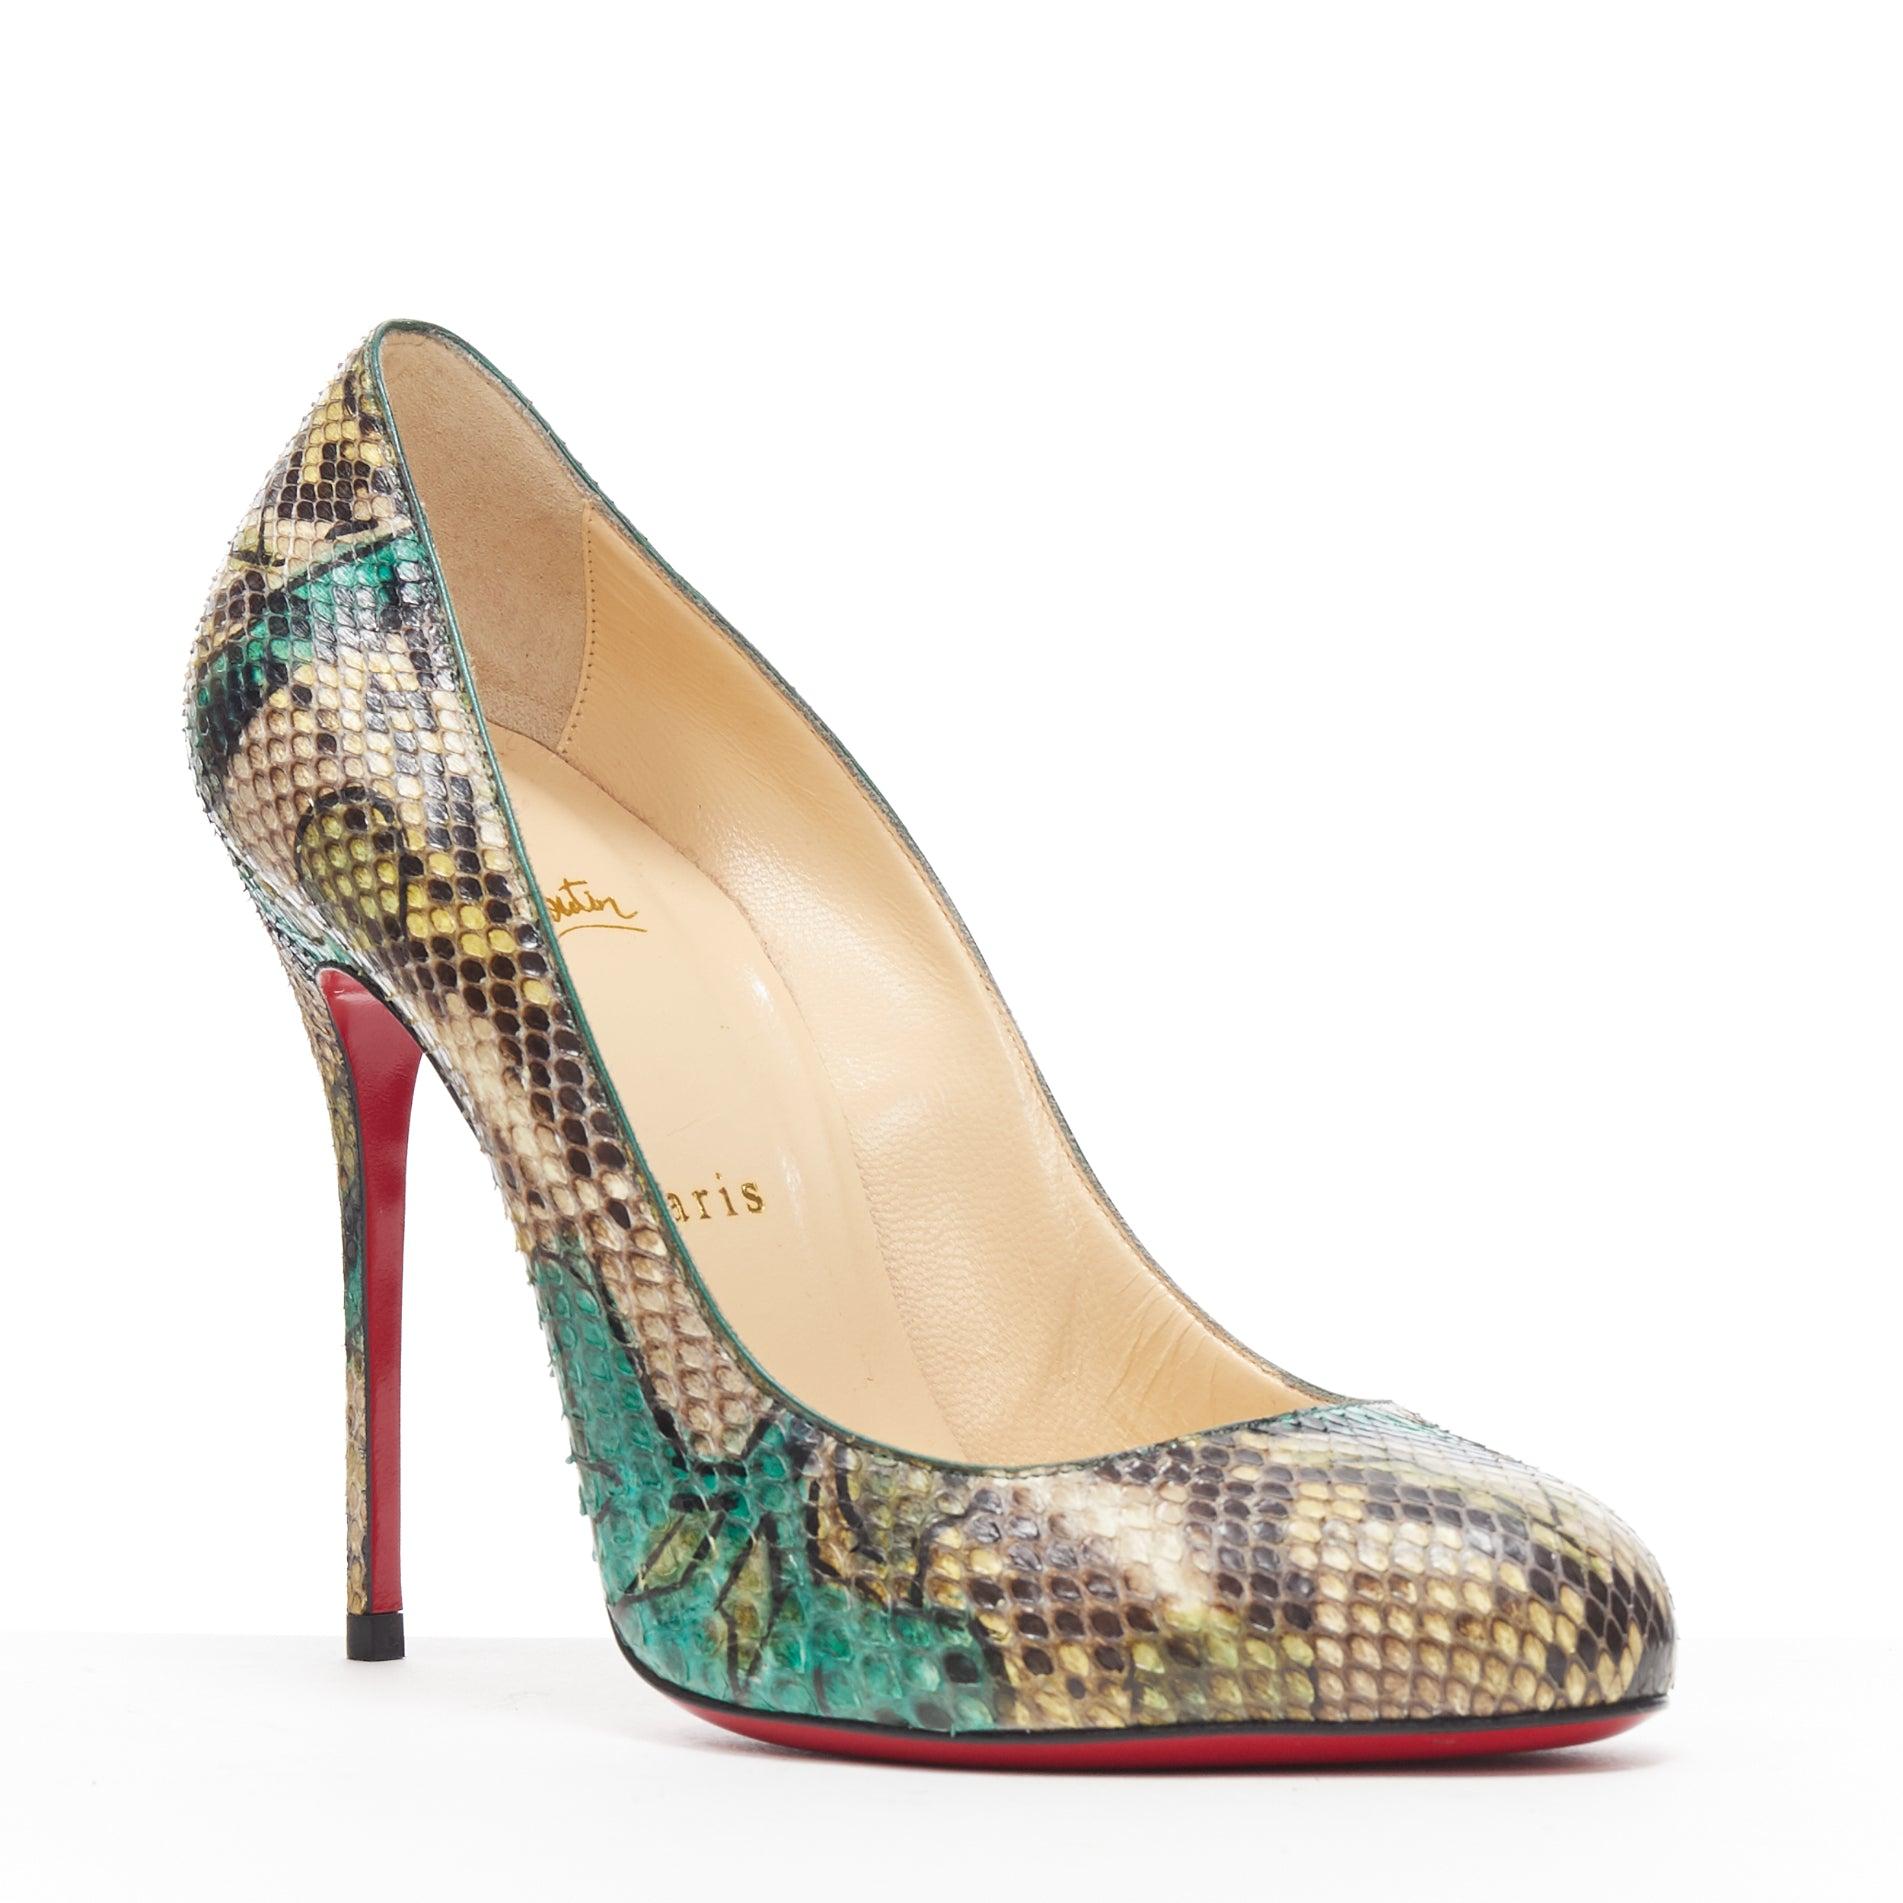 CHRISTIAN LOUBOUTIN green leaf print scaled leather almond toe pump EU39
Reference: TGAS/A05759
Brand: Christian Louboutin
Model: Almond toe pumps
Material: Leather
Color: Green
Pattern: Abstract
Extra Details: Almond round toe. Slim stiletto heel.